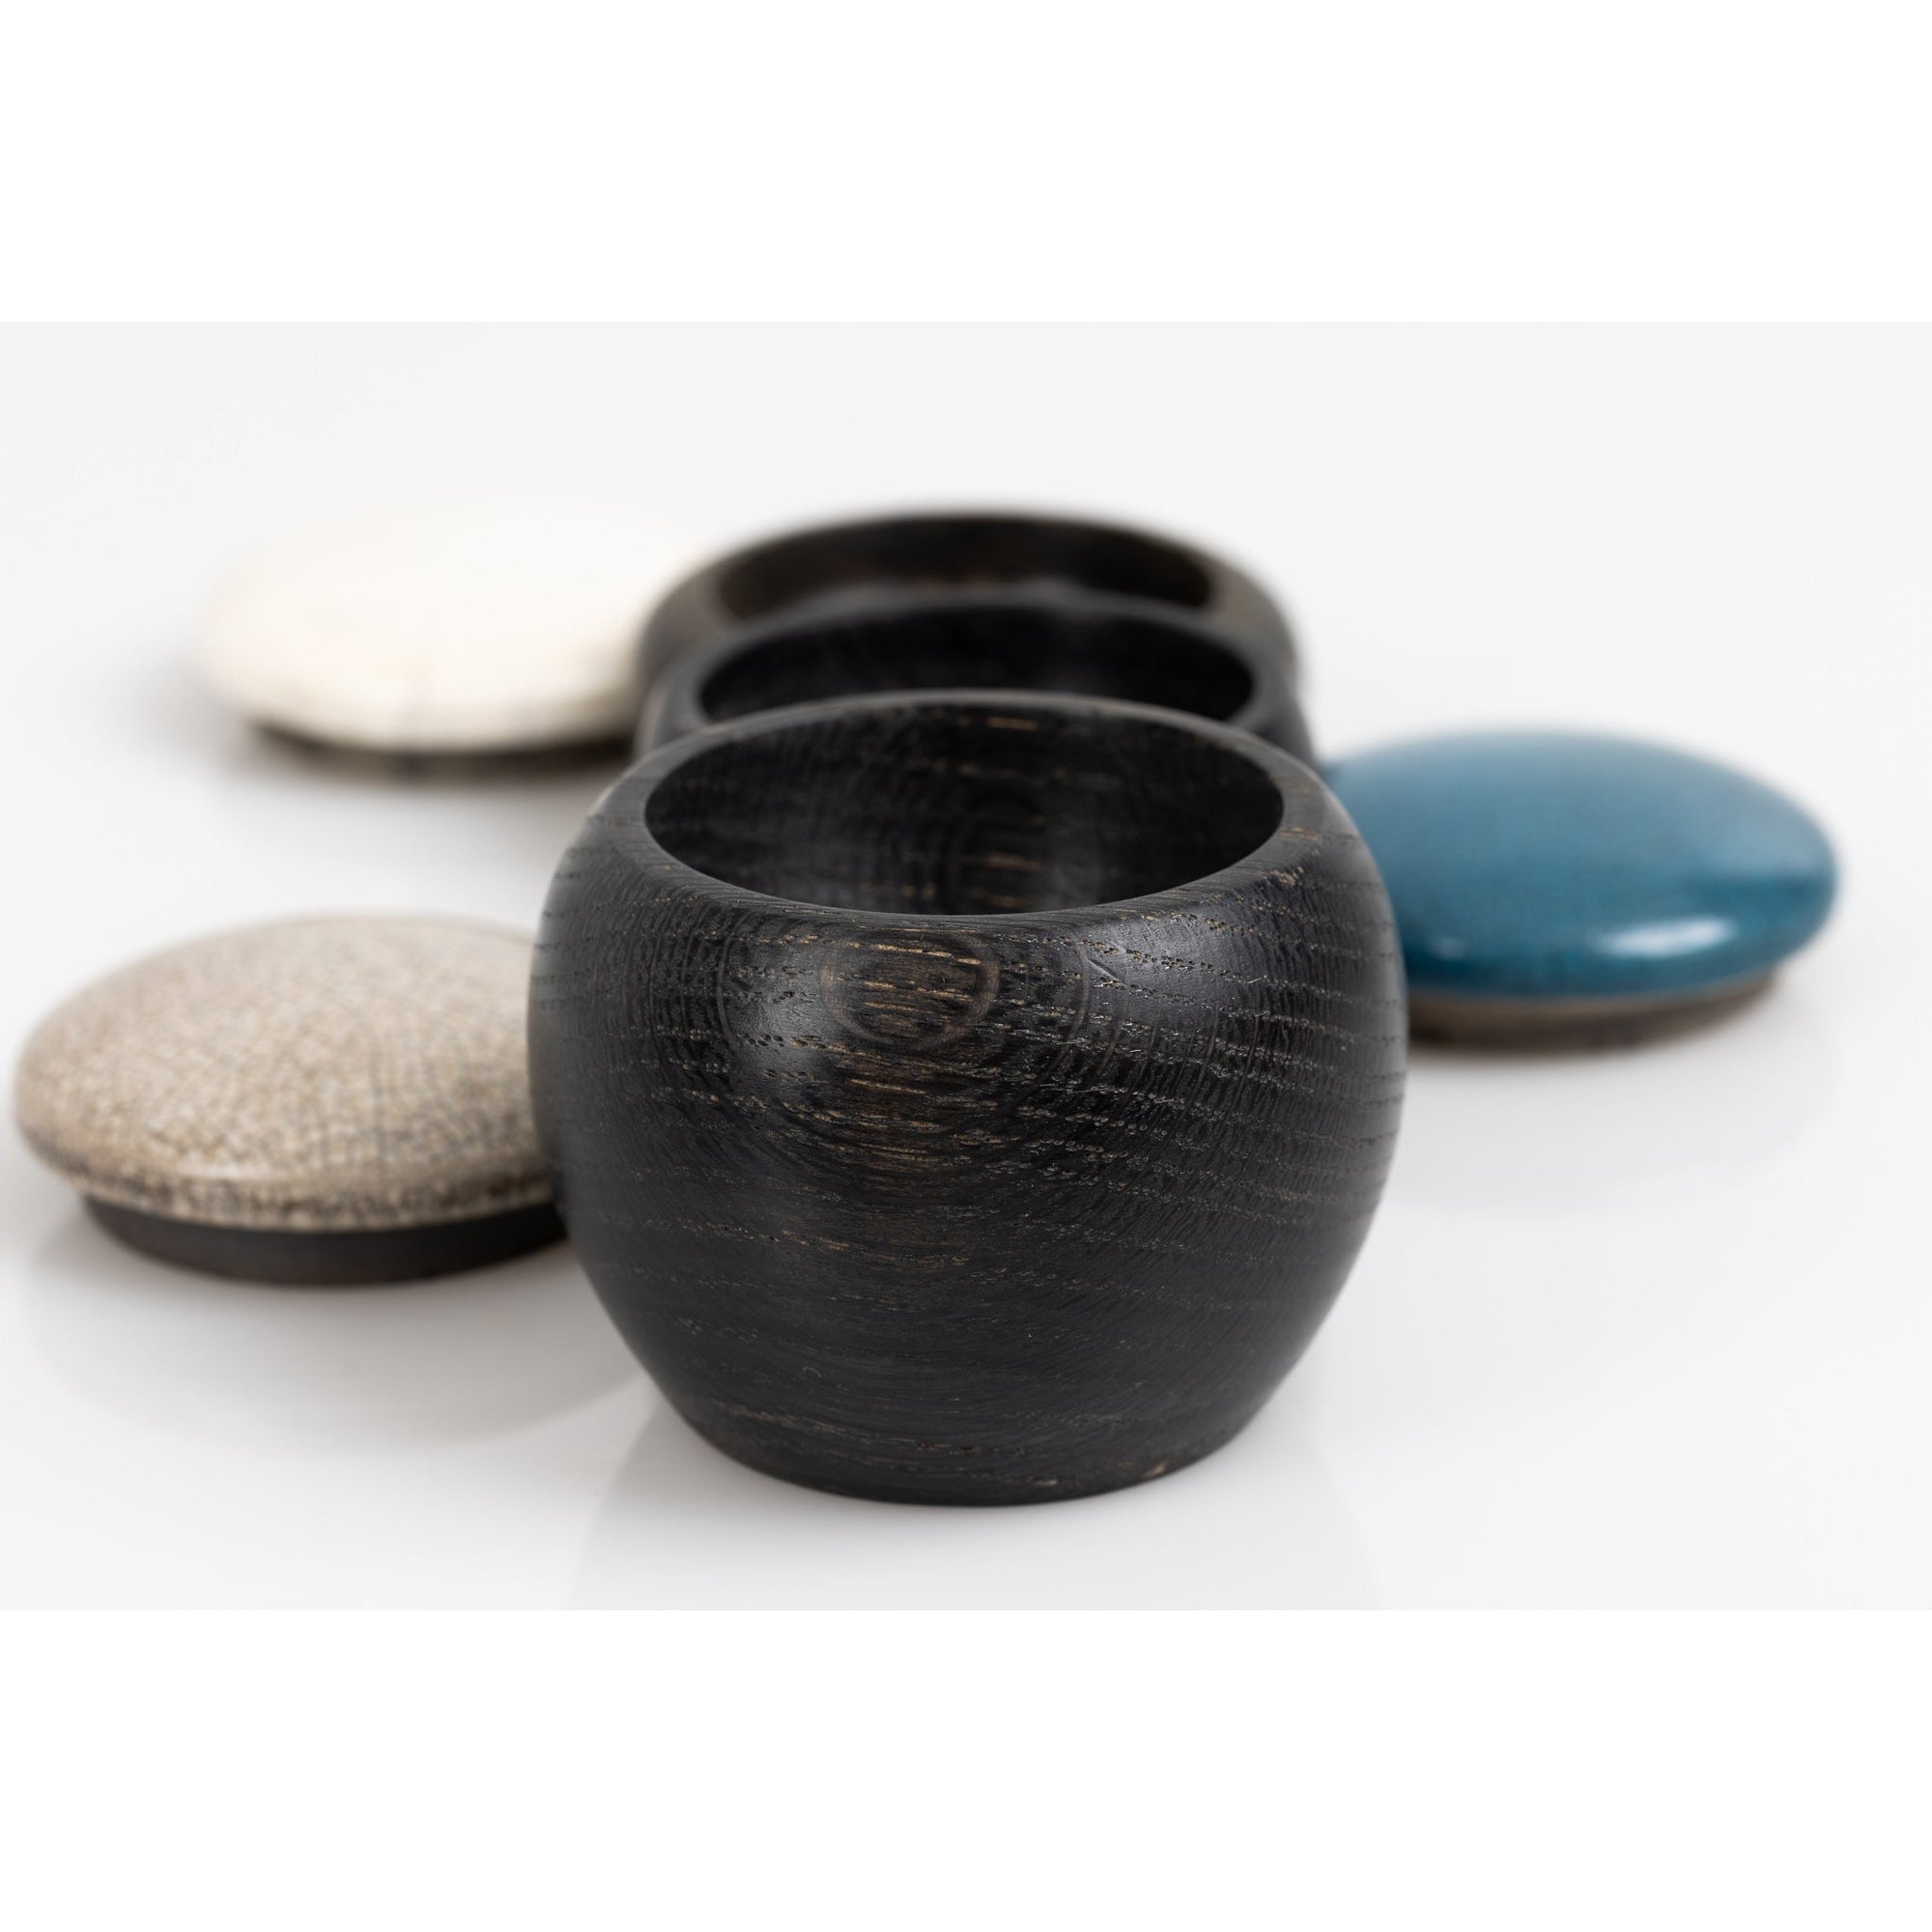 KSCC3 Ebonised Wave Pot by Kate Schuricht, available at Padstow Gallery, Cornwall